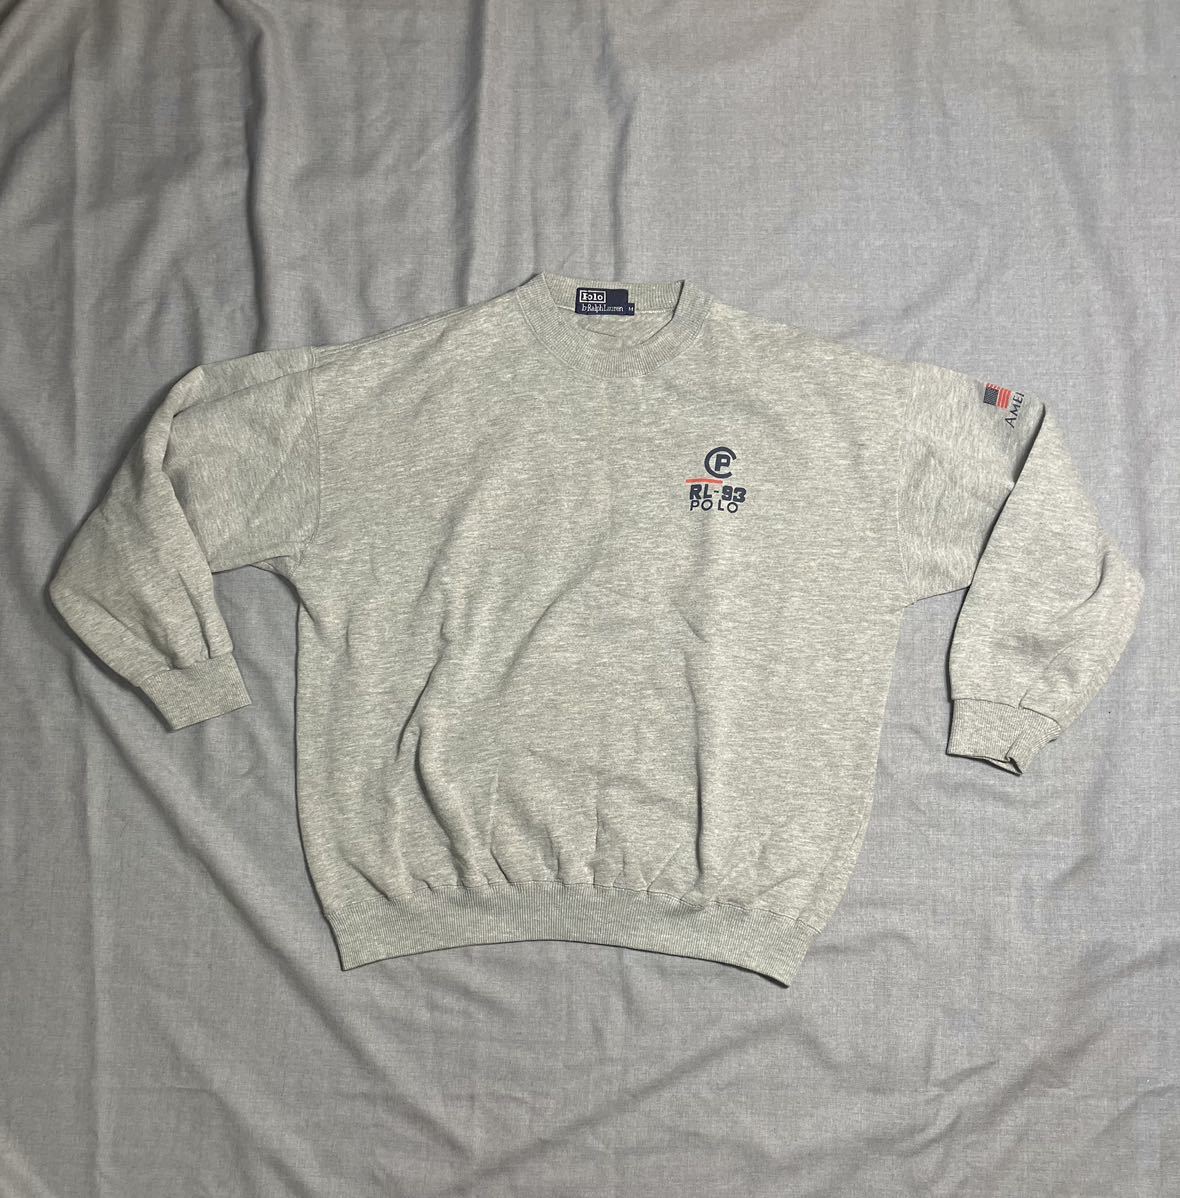 90s Polo Ralph Lauren America z cup sweat Vintage M 1992 1993 star article flag domestic regular goods POLO SPORT country sportsman